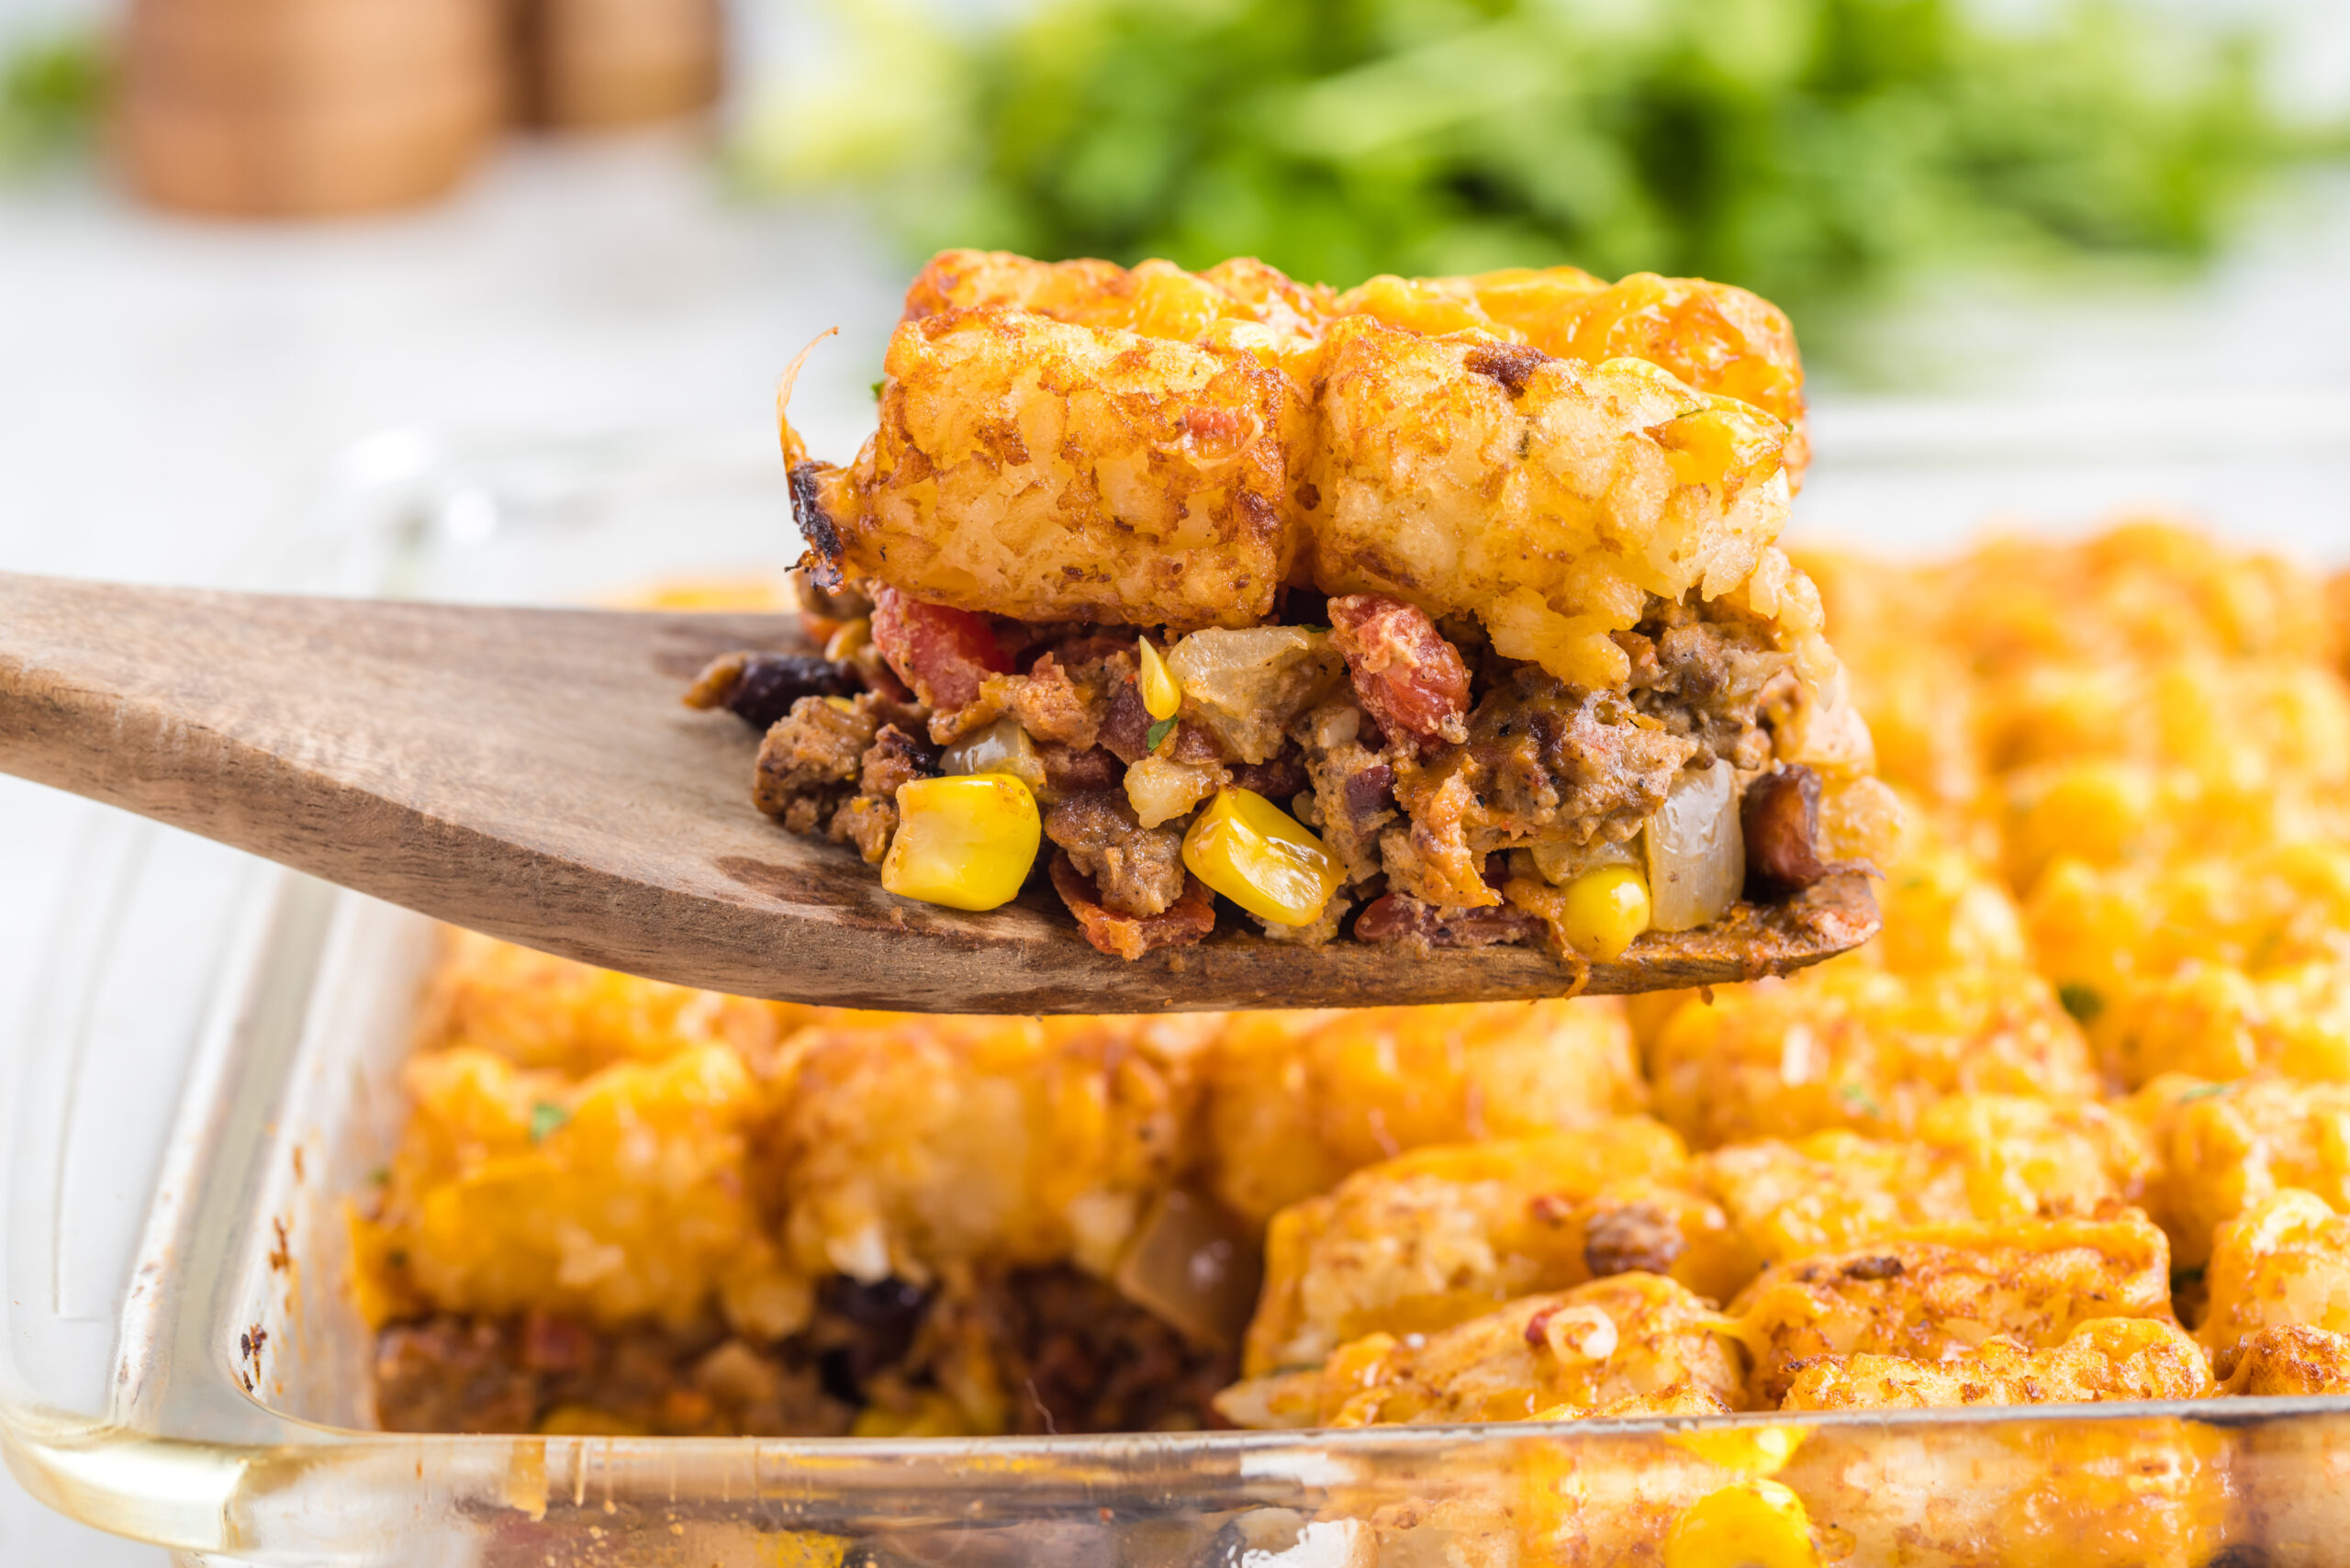 This easy cowboy casserole recipe is the perfect way to feed a hungry crowd! Loaded with tex-mex flavour, this dish is sure to please.